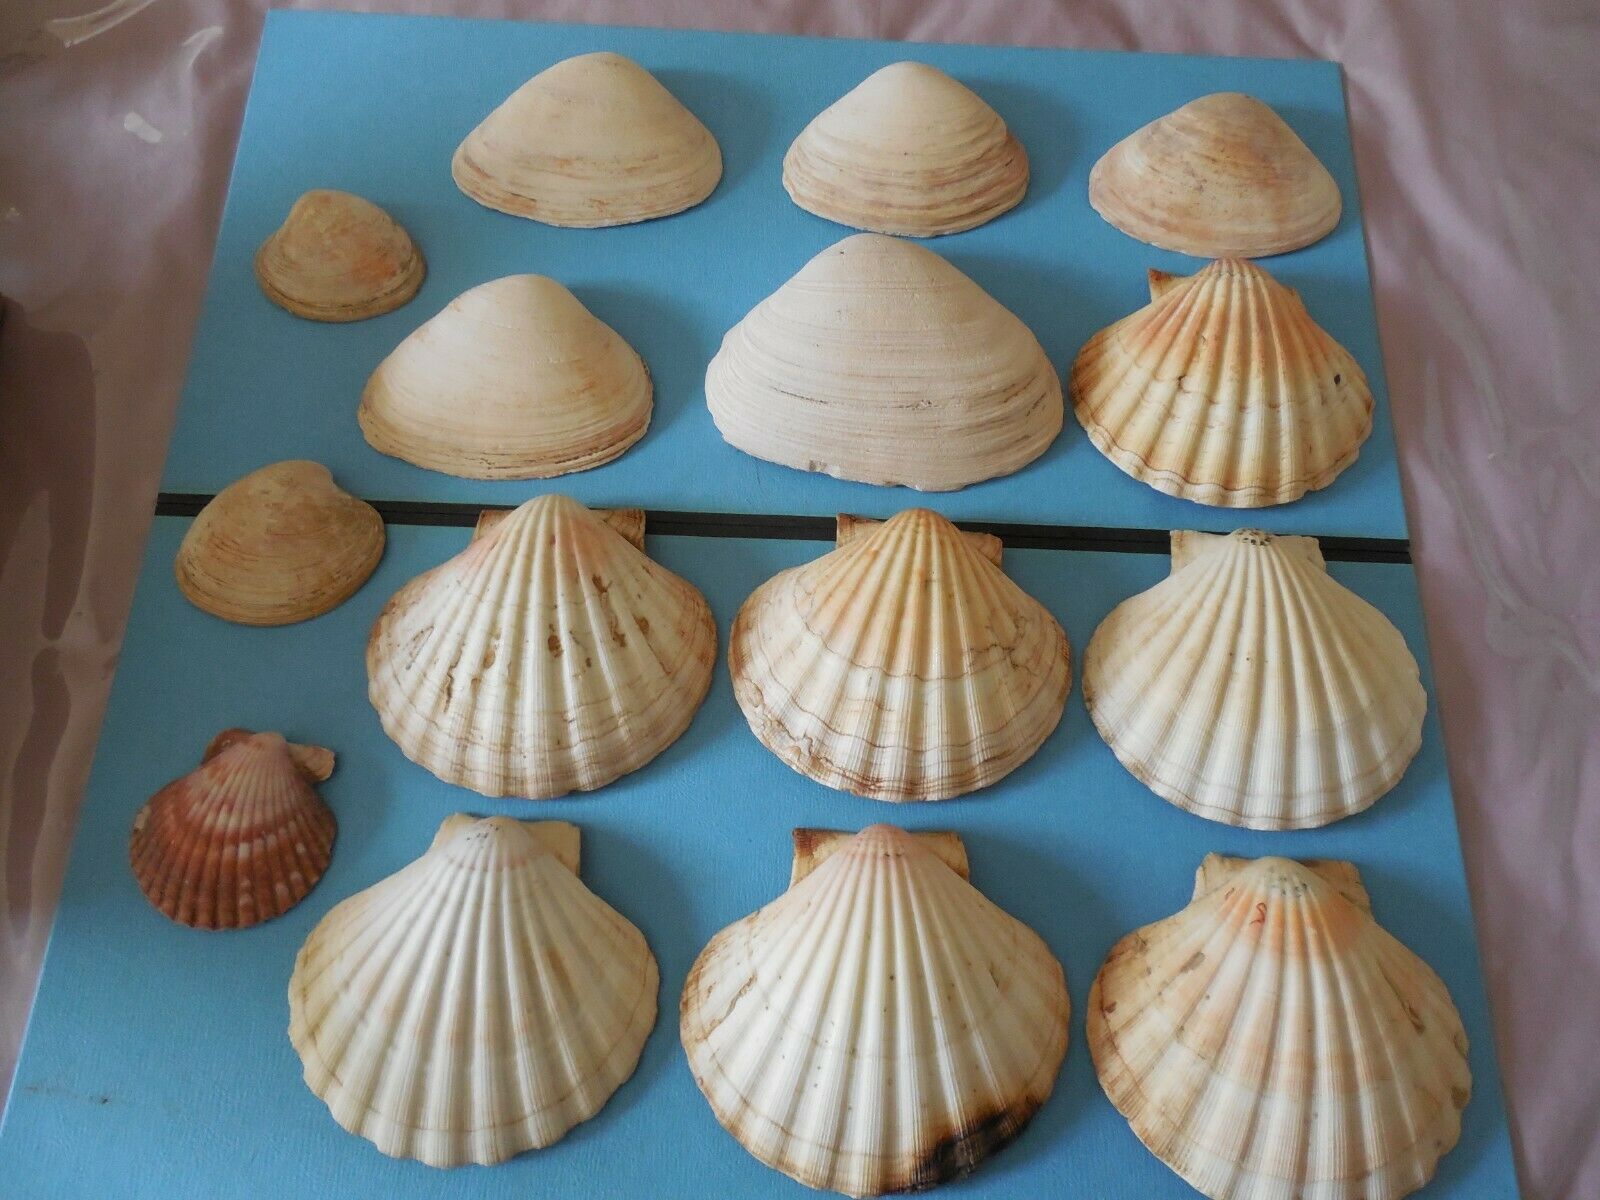 12 Baking Scallop Clam Seafood Cooking Shells 4 1/4" - 5 3/4" +3 Small 2 3/4"